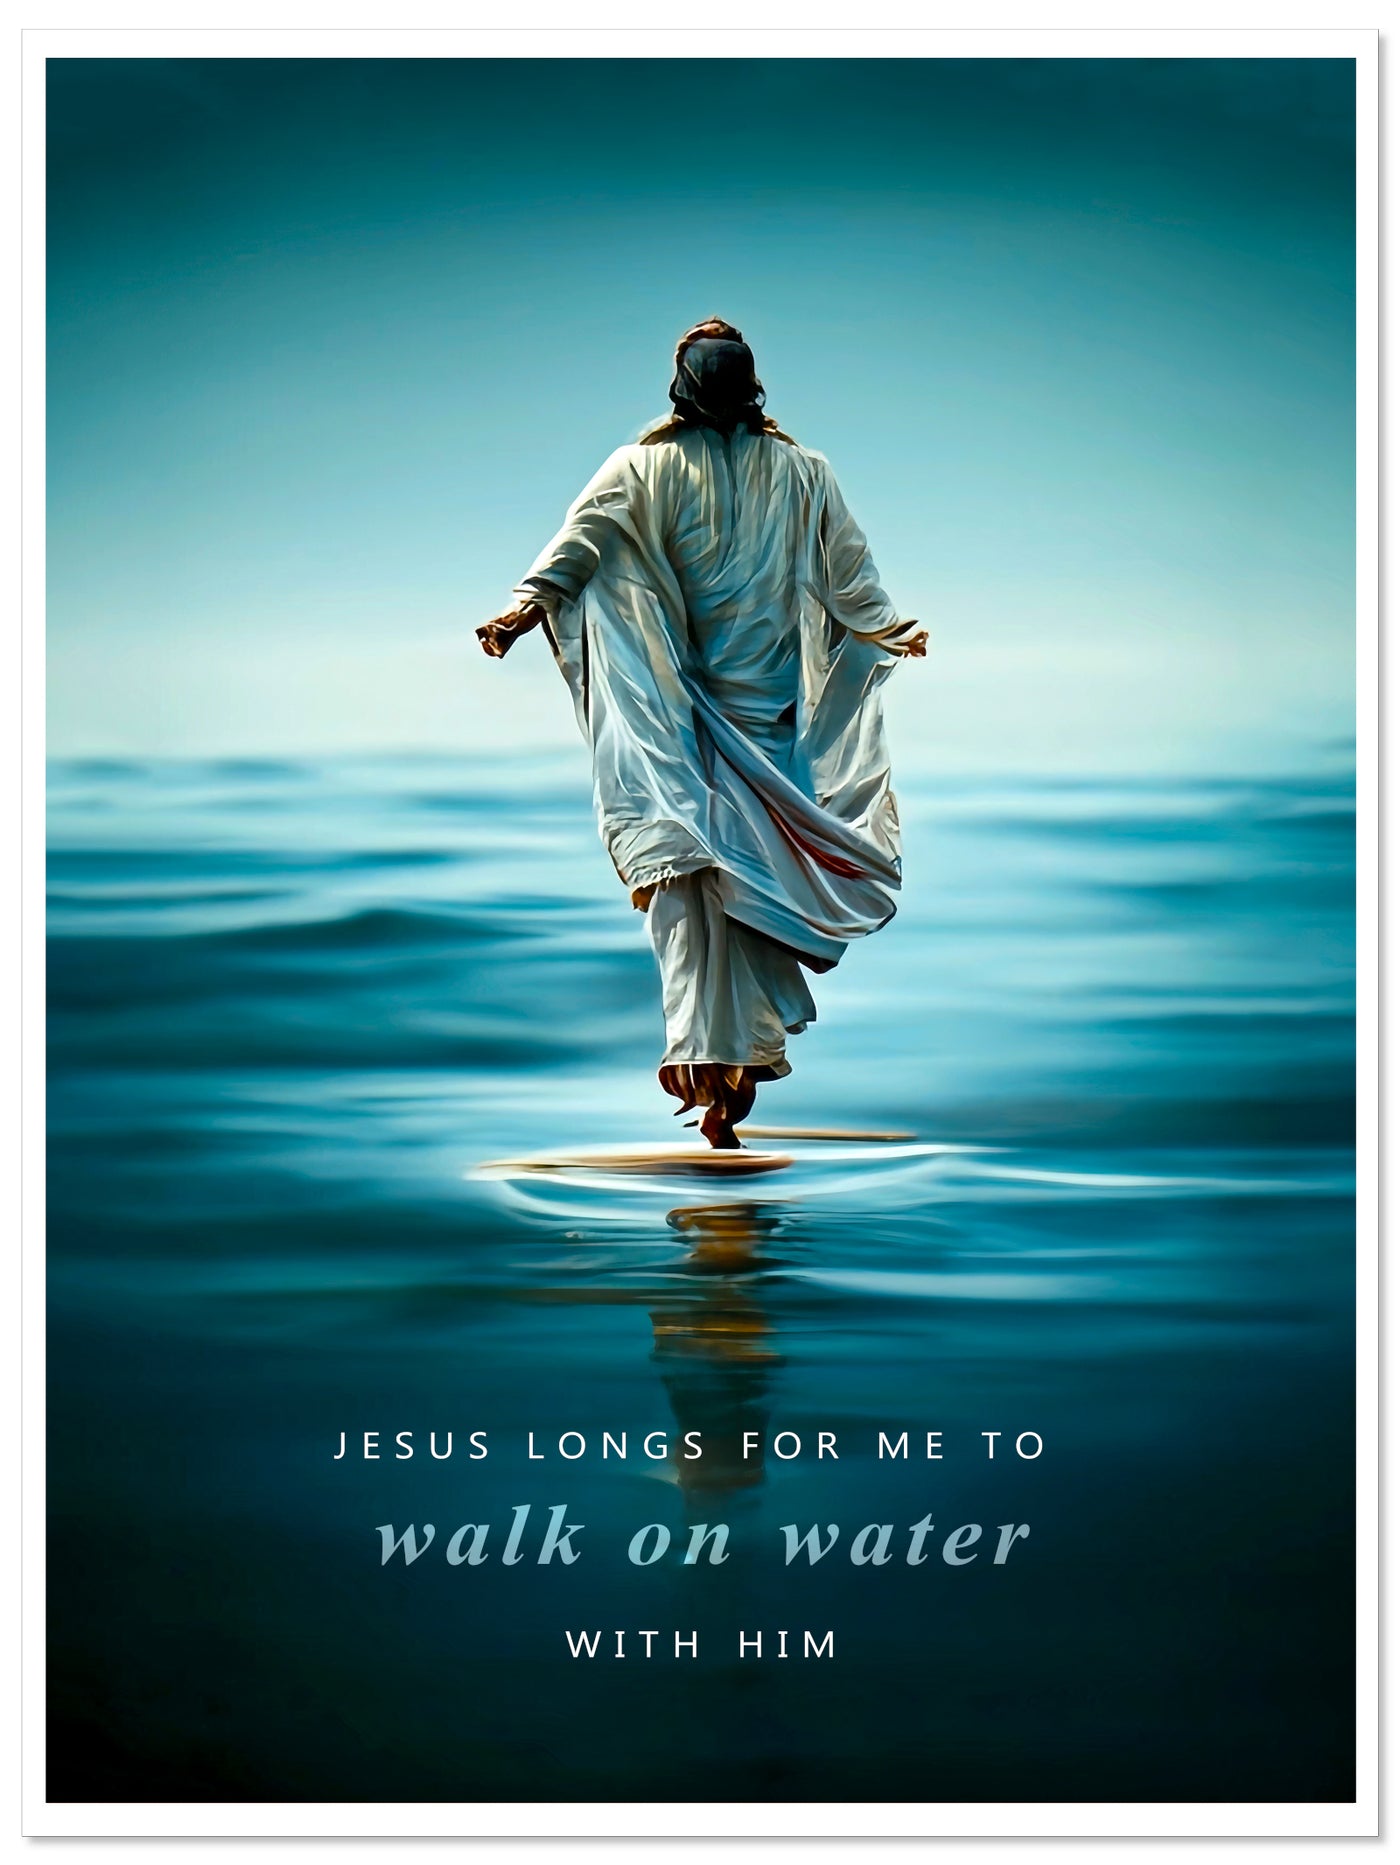 Walk on Water Poster